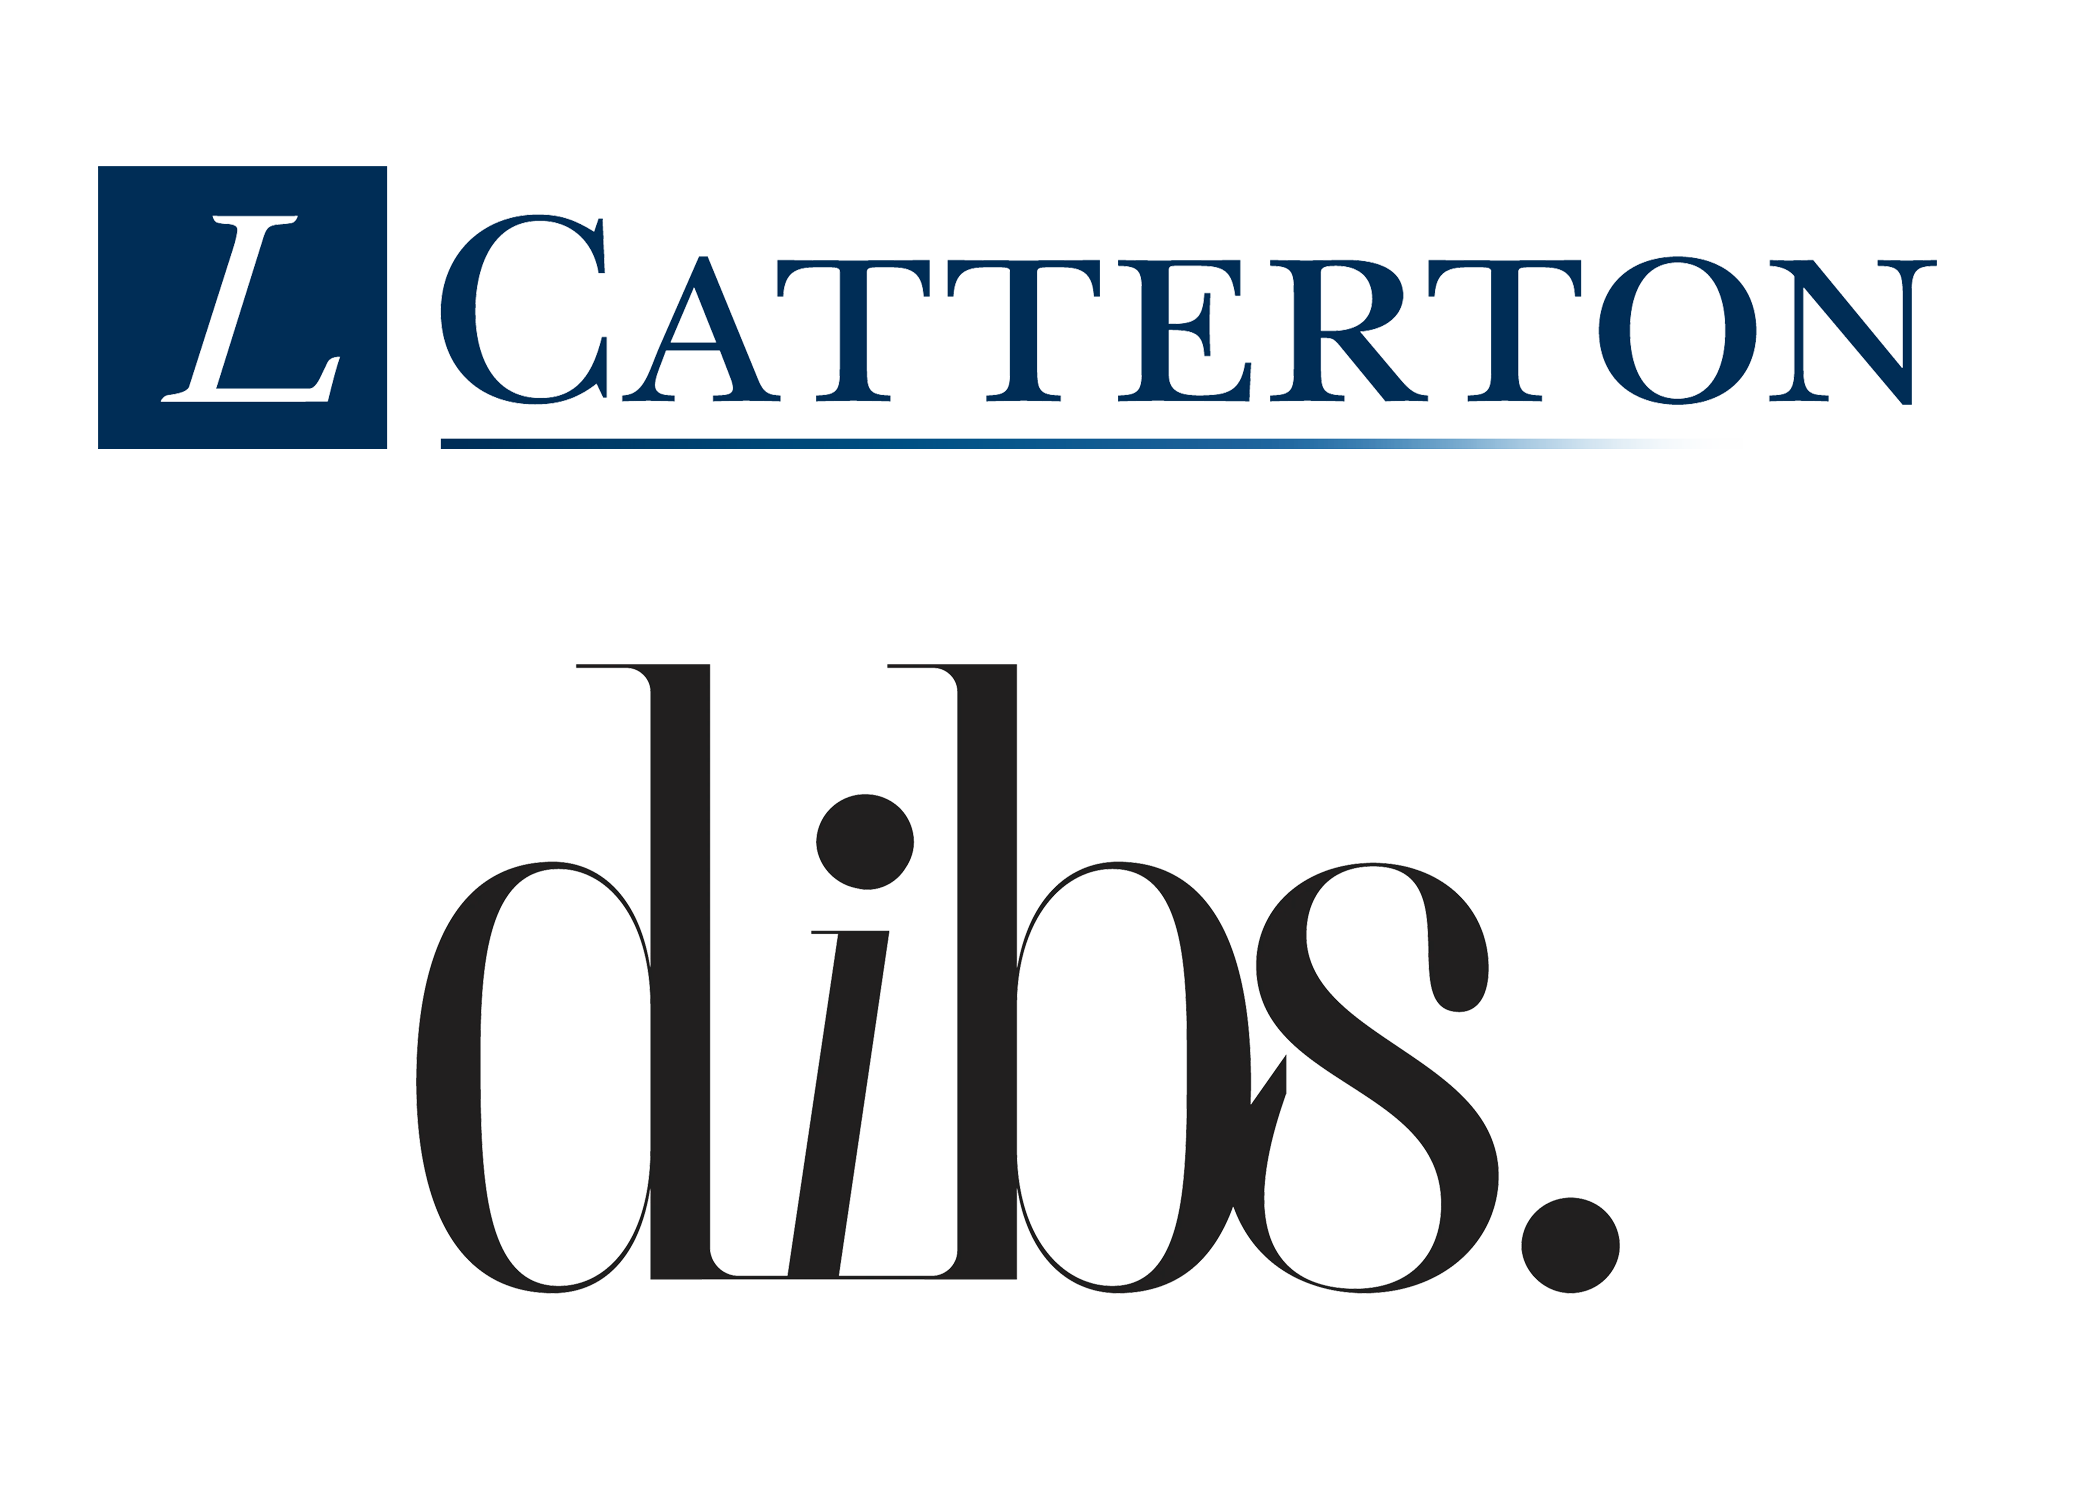 L Catterton Real Estate - Contacts, Employees, Board Members